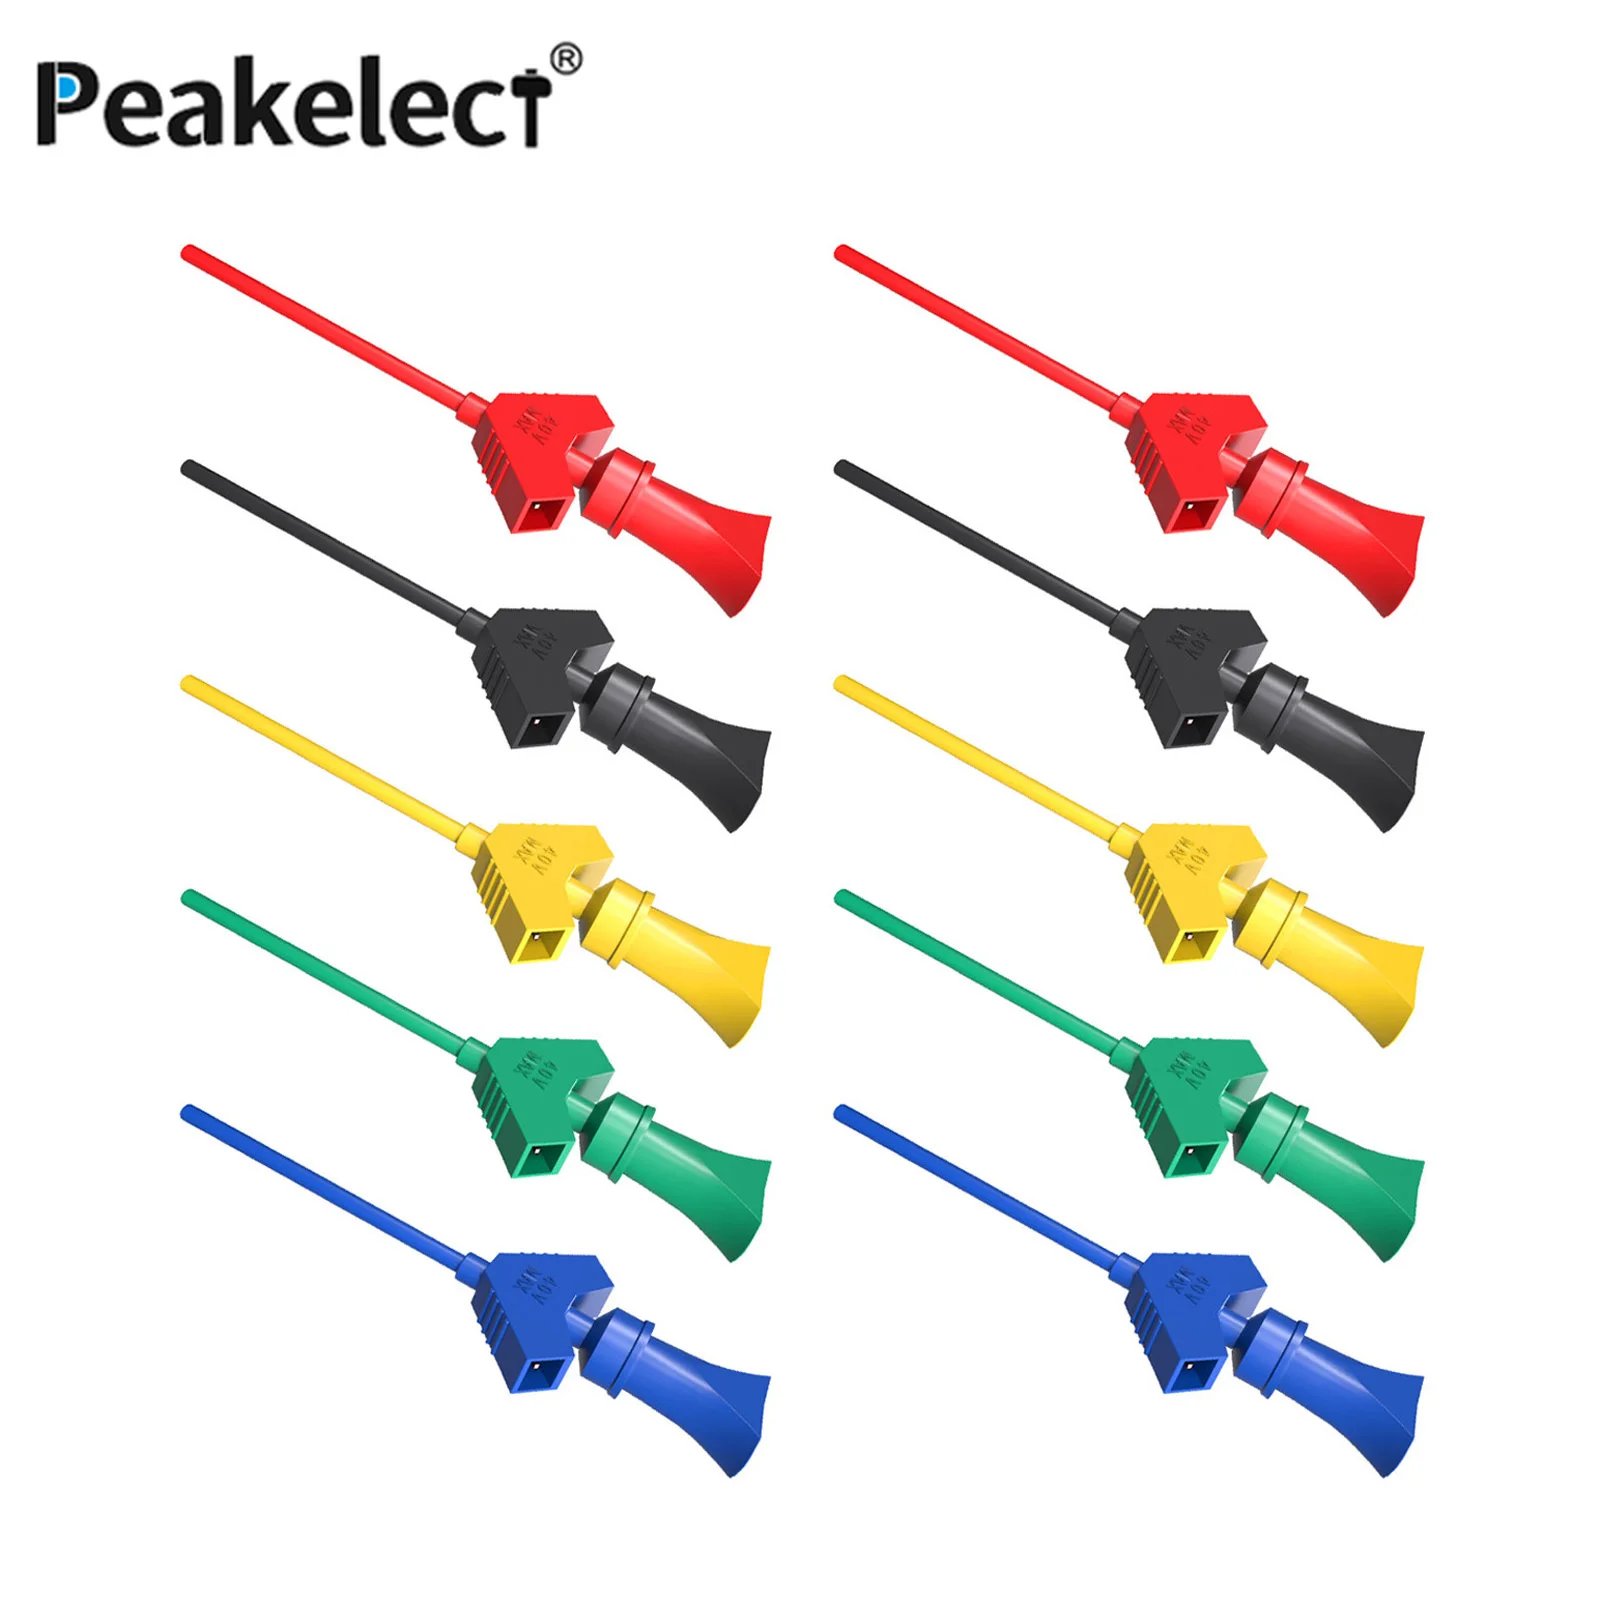 Peakelect SMD IC Mini Grabber Test Hook Clip with Jumper Wire for Logic Analyzer 